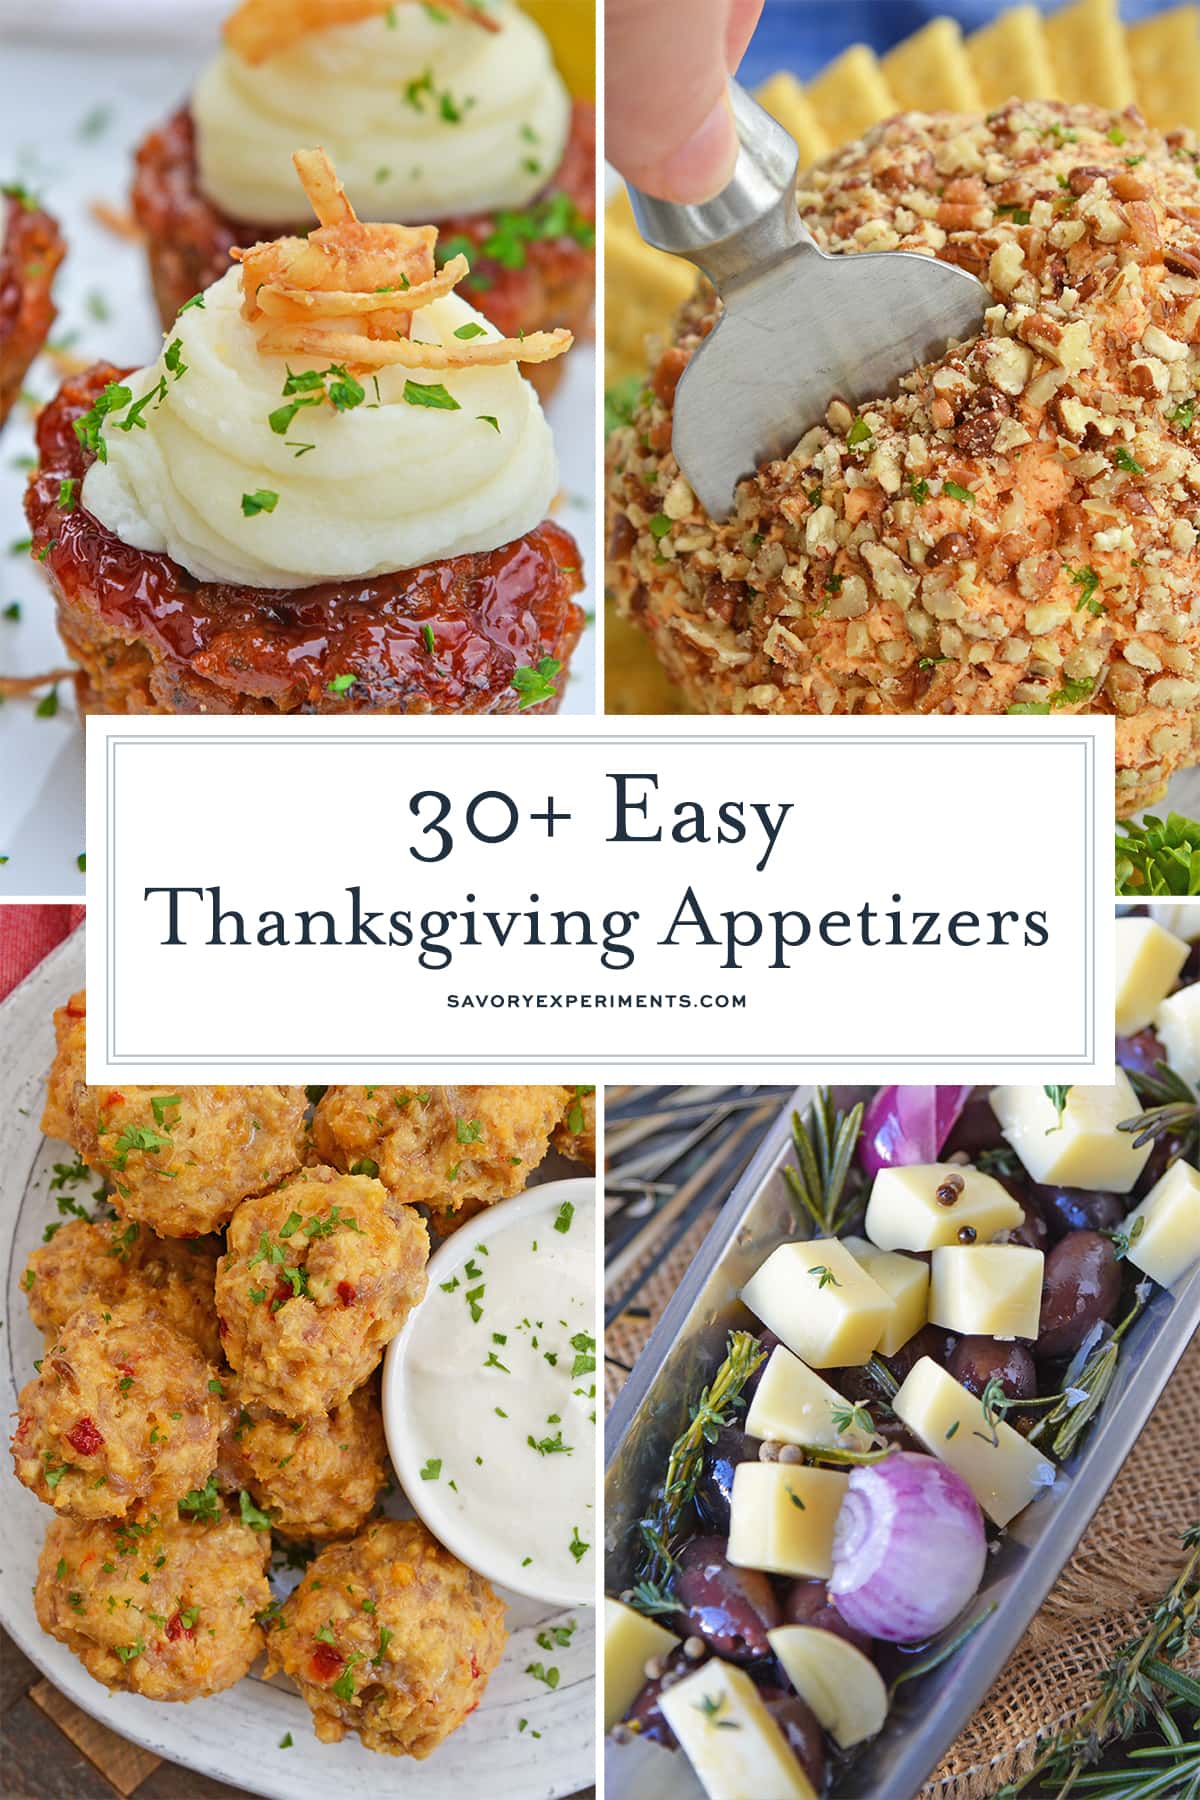 30+ BEST Thanksgiving Appetizers - Breads, Cheeses, Dips and MORE!